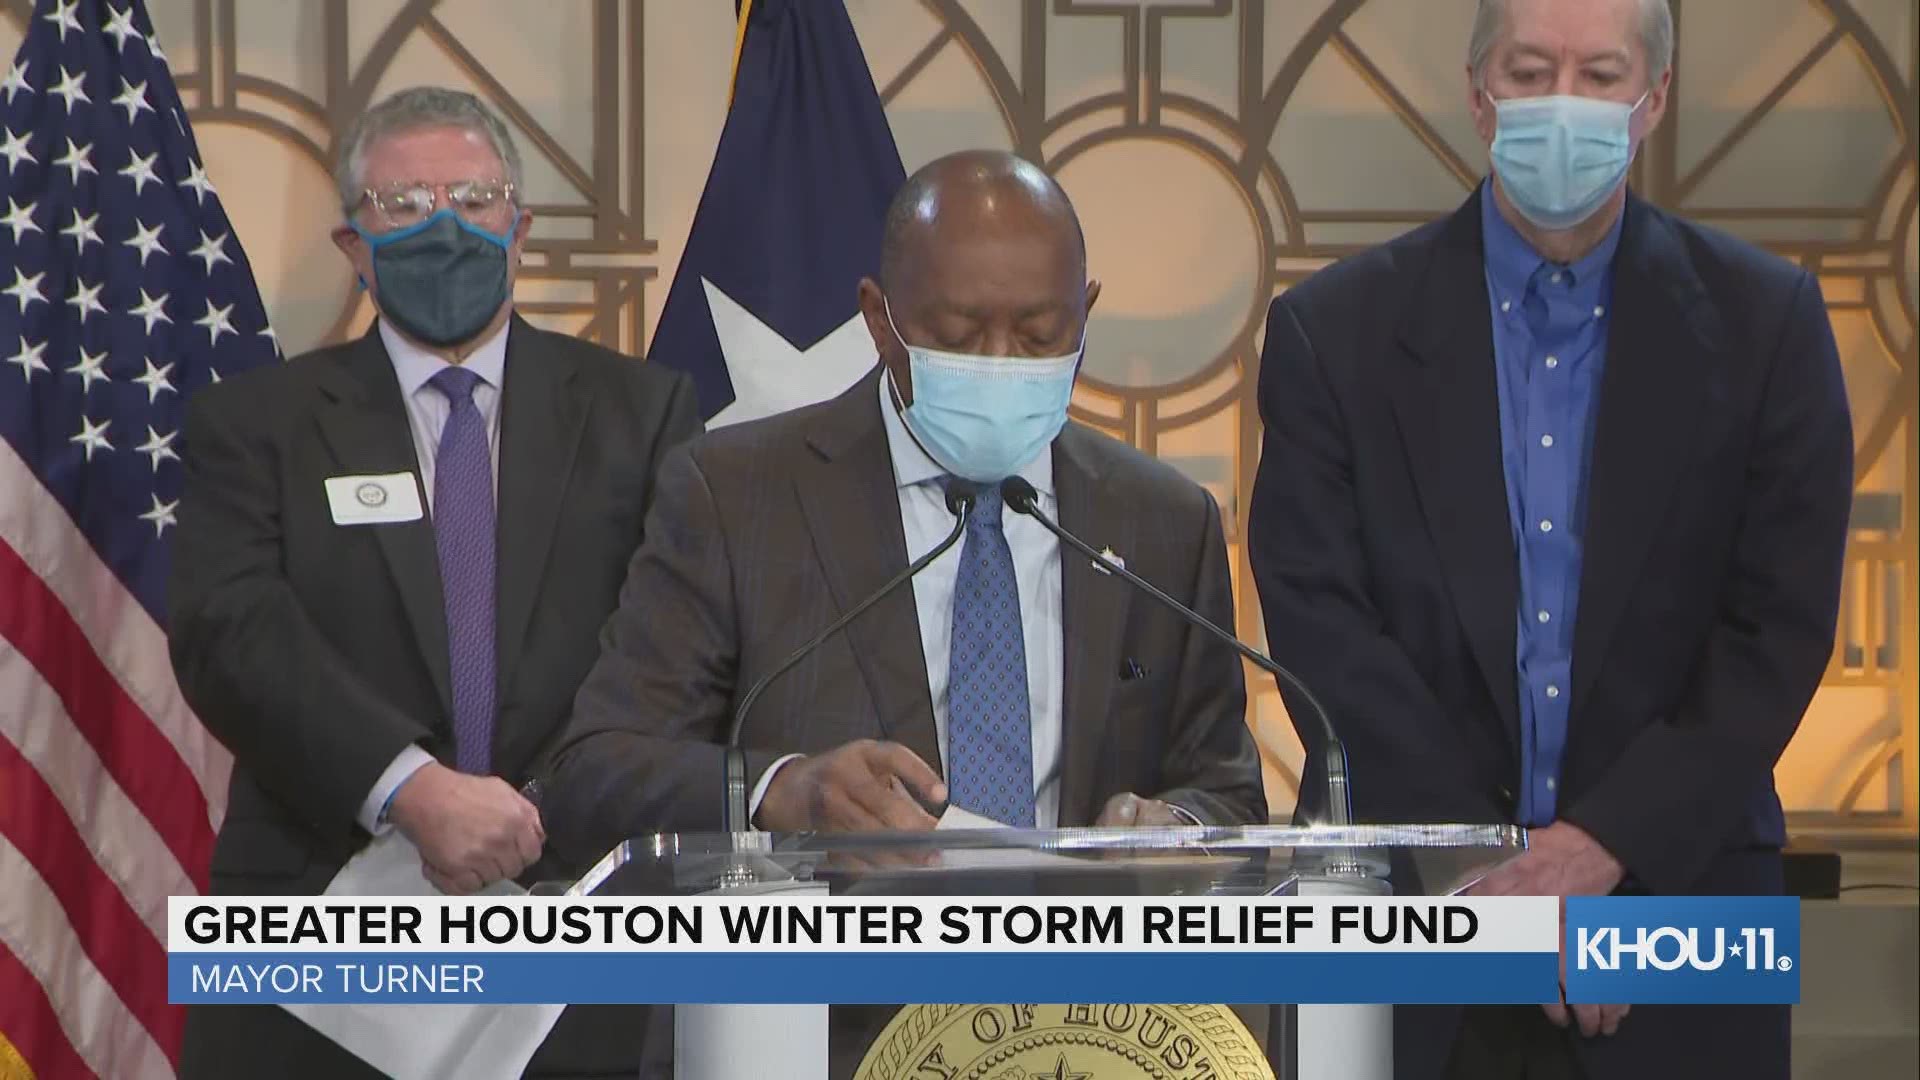 Mayor Turner shared details of the Greater Houston Winter Storm Relief Fund. At this time, the fund is not taking applications, but donations are greatly needed.